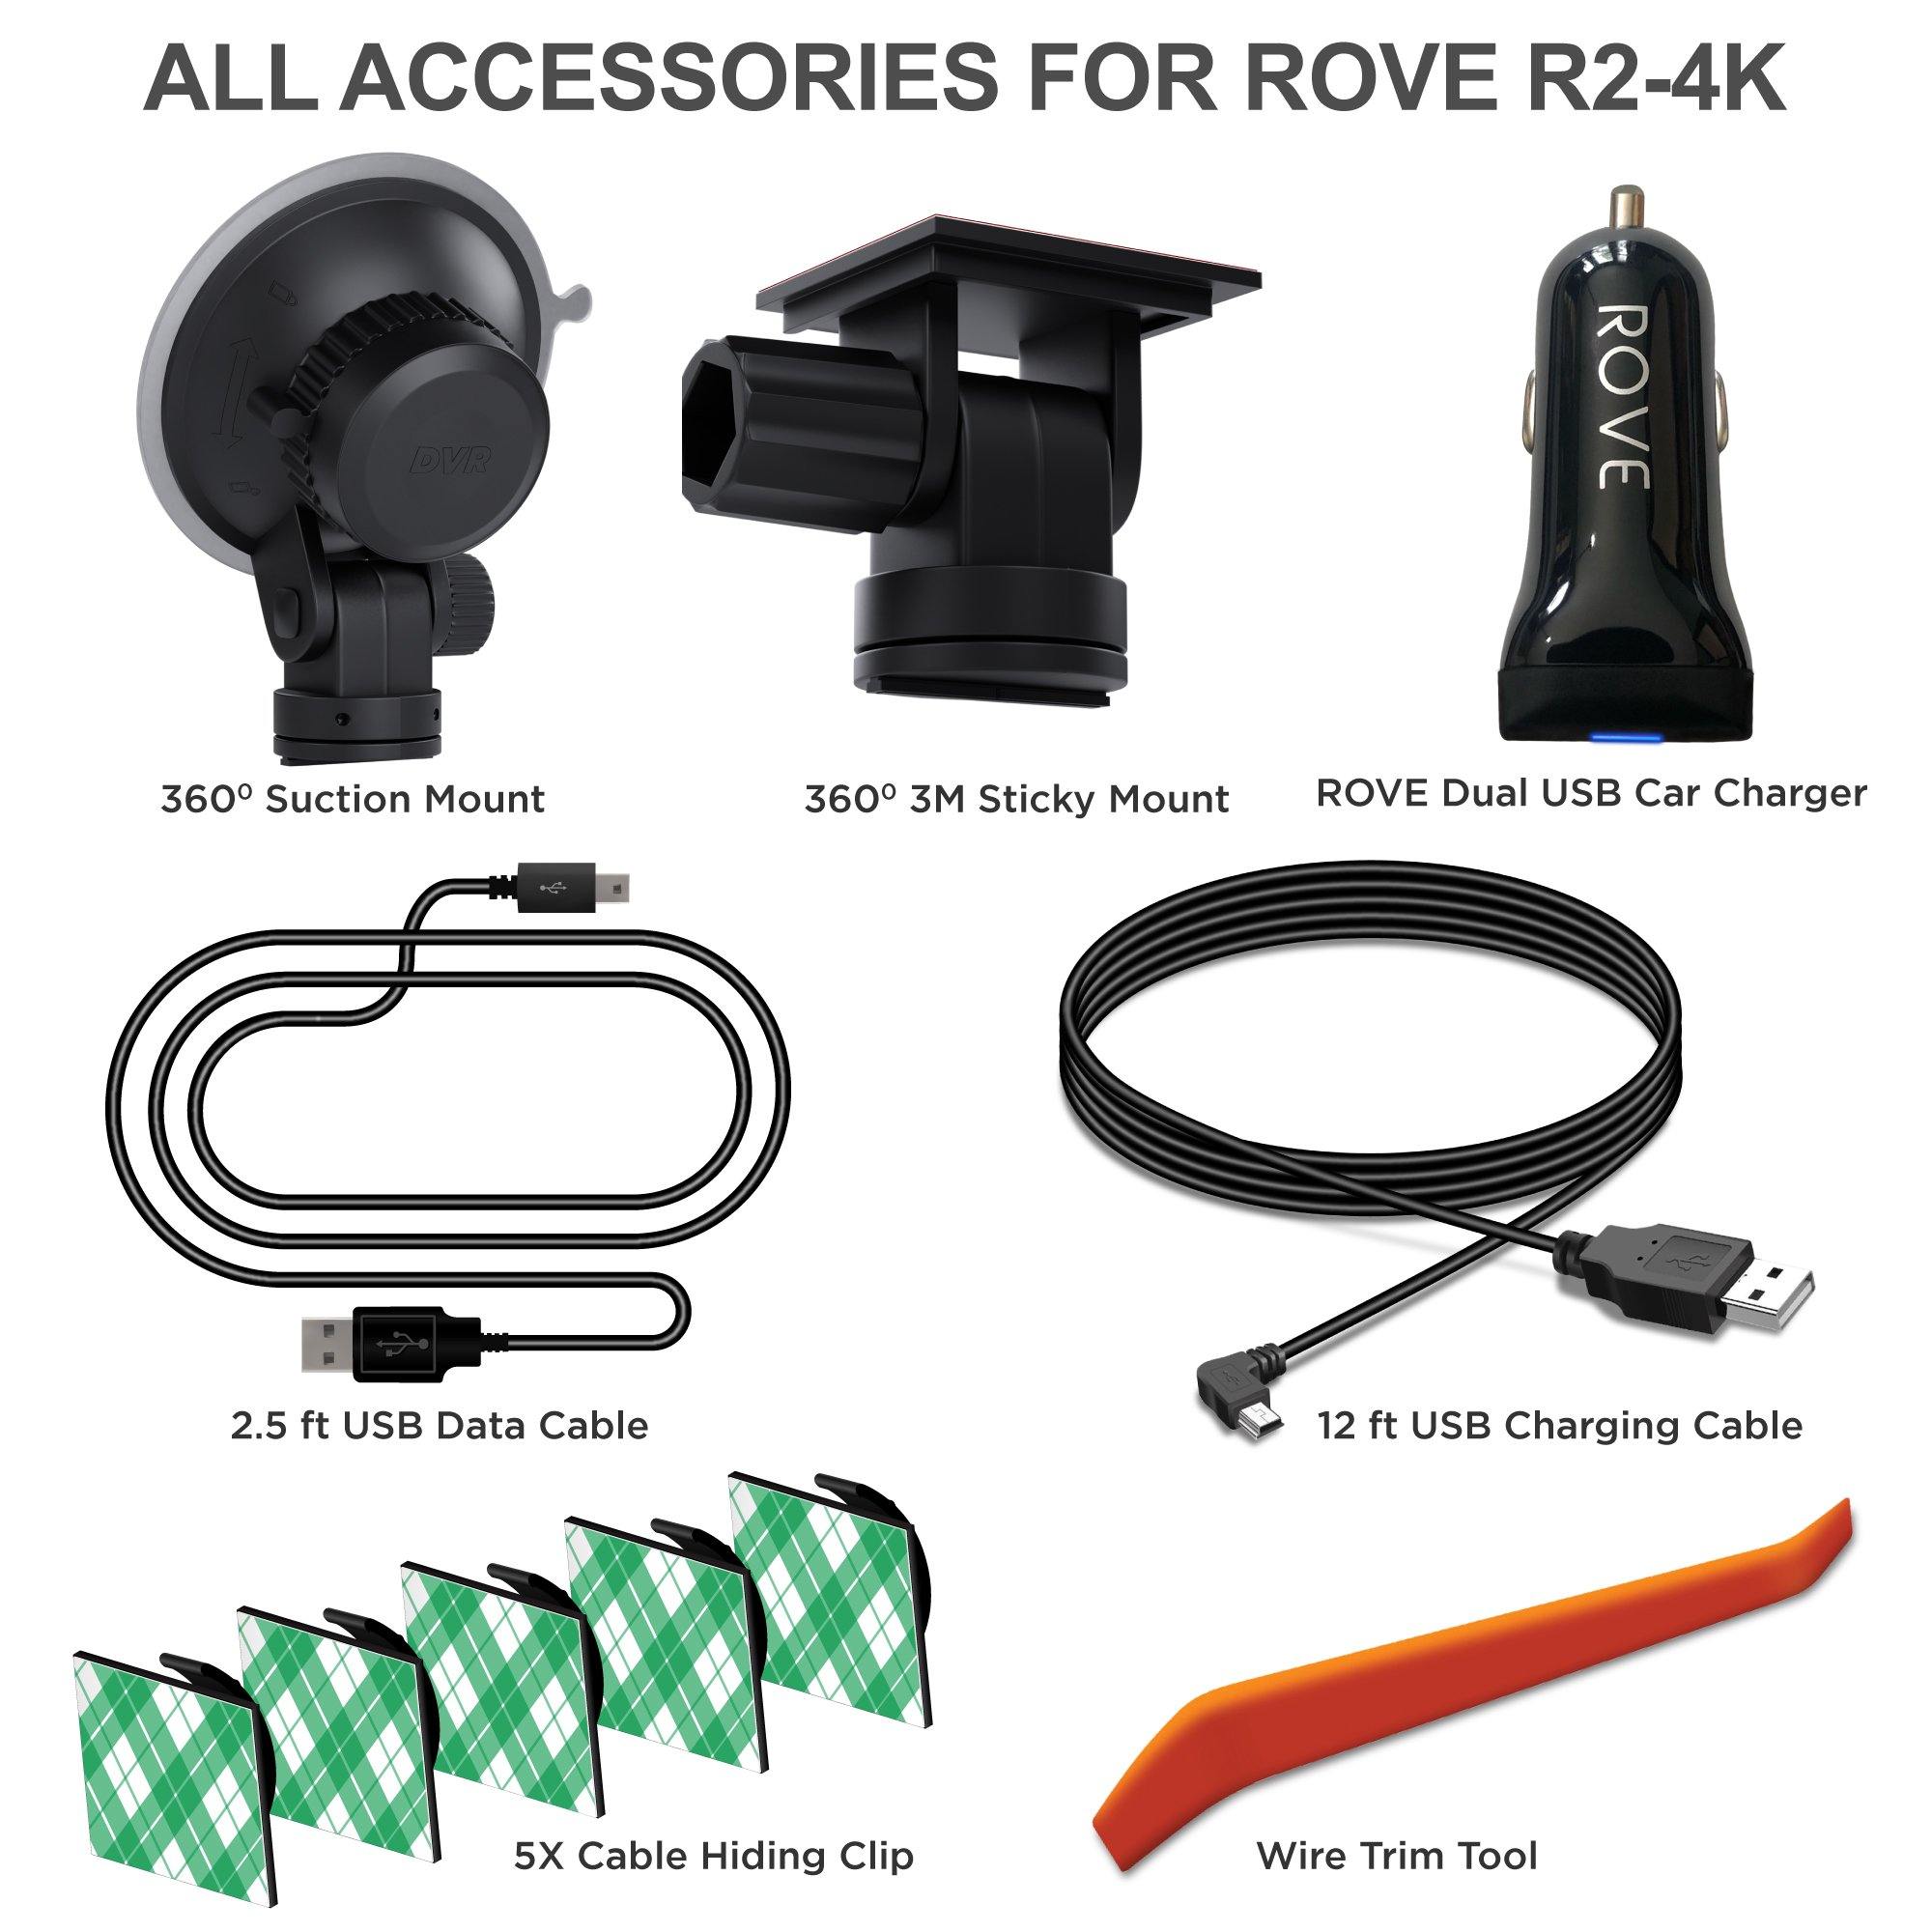 ROVE R2-4K Set up All Accessories